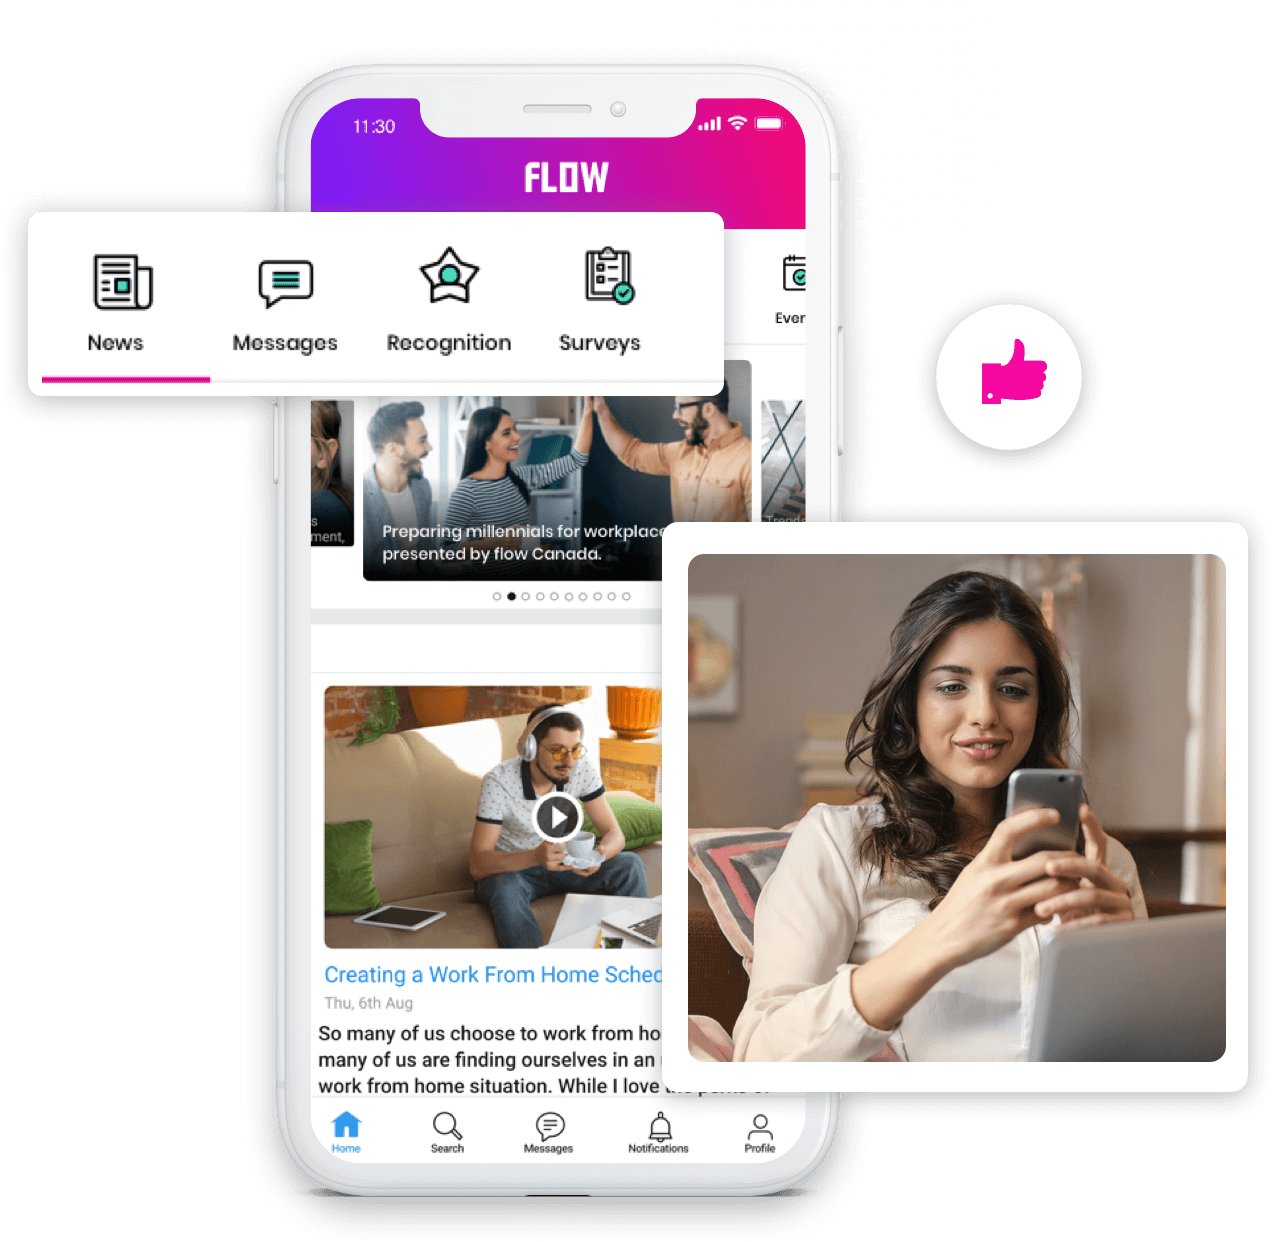 Create beautiful, powerful employee apps for iOS and Android that meet your employee communication needs while accelerating engagement fast. Reach your employees with relevant content through deep segmentation tools that makes it fun and engaging.